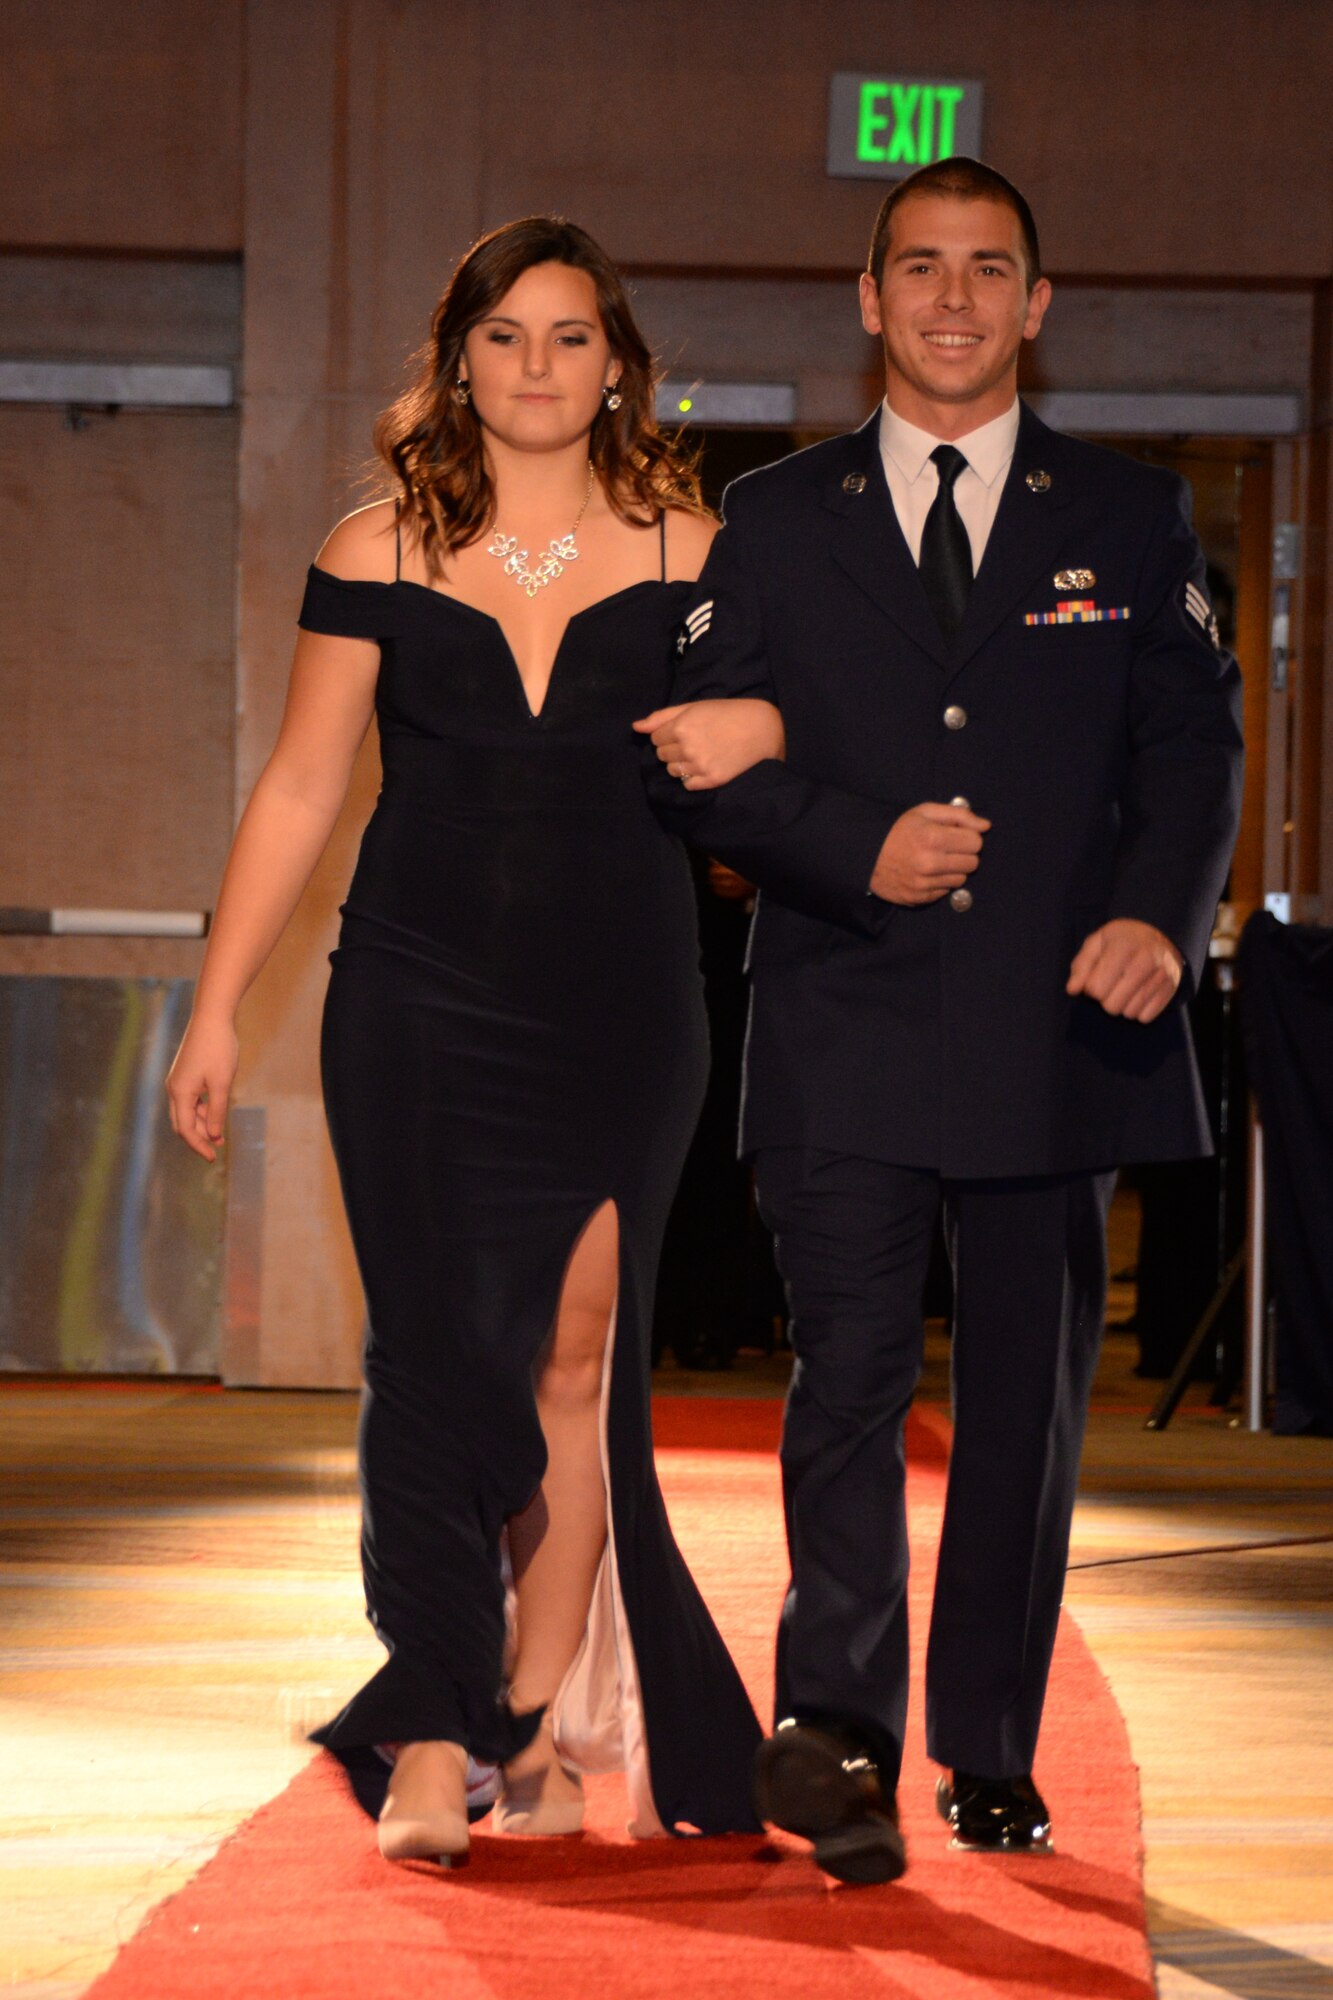 146th Airlift Wing's Senior Airman Ryan Anzil walks the red carpet with his girlfriend at the 2017 Annual Outstanding Soldier/Airman of the Year Banquet. (U.S. ANG photo by: Staff Sgt. Kim Ramirez)